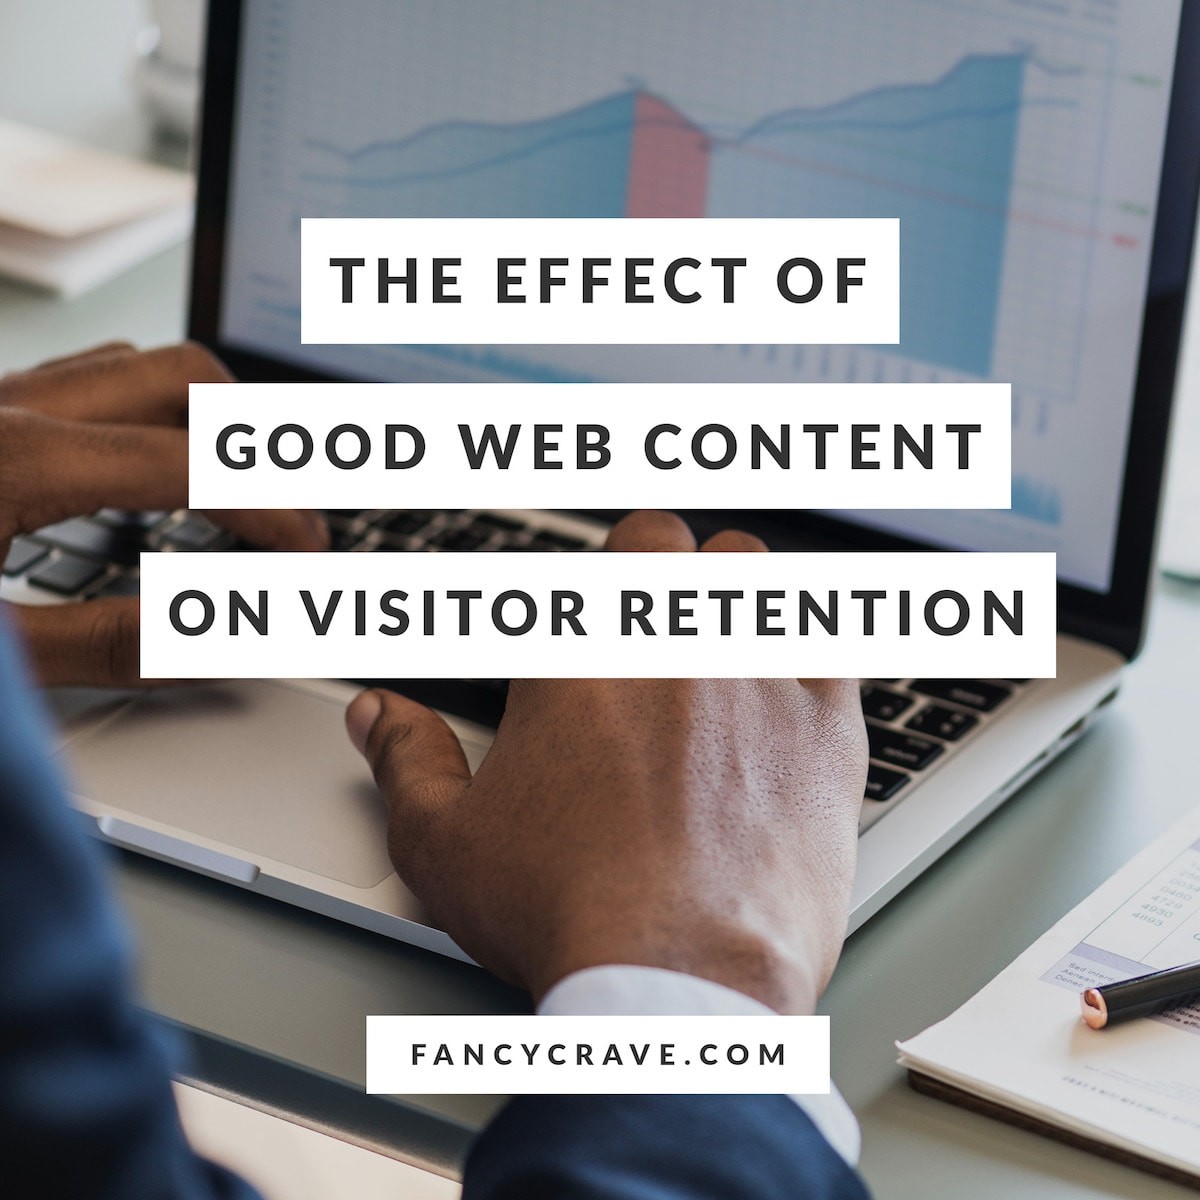 The Effect of Good Web Content on Visitor Retention